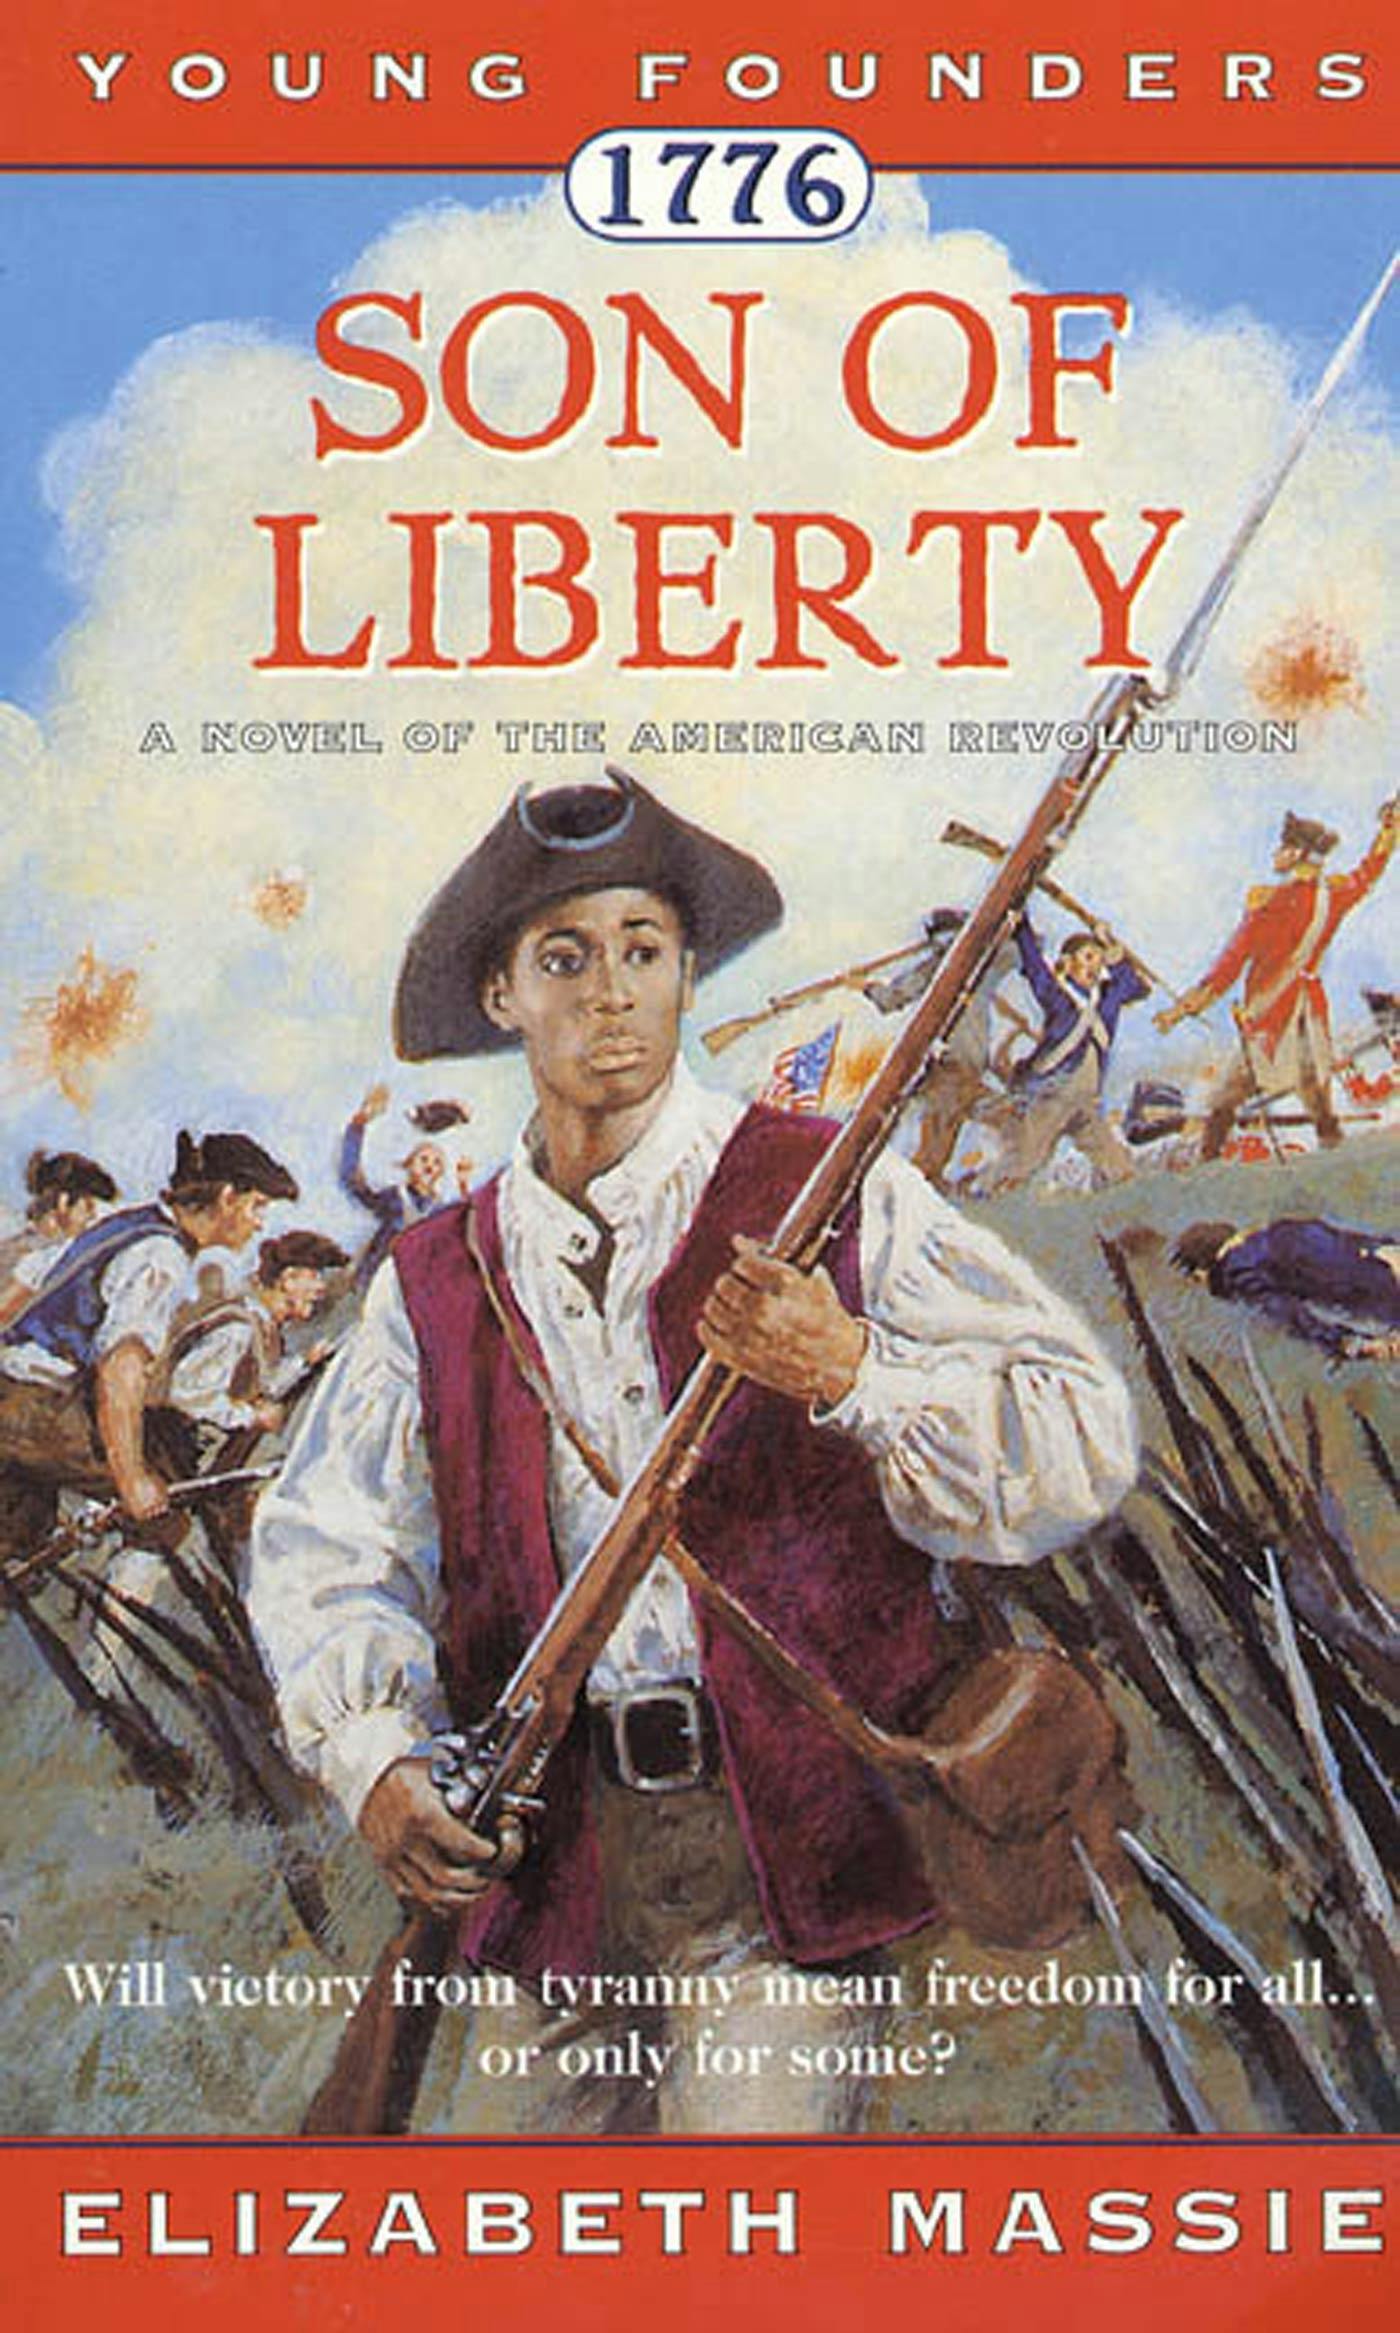 Cover for the book titled as: 1776: Son of Liberty